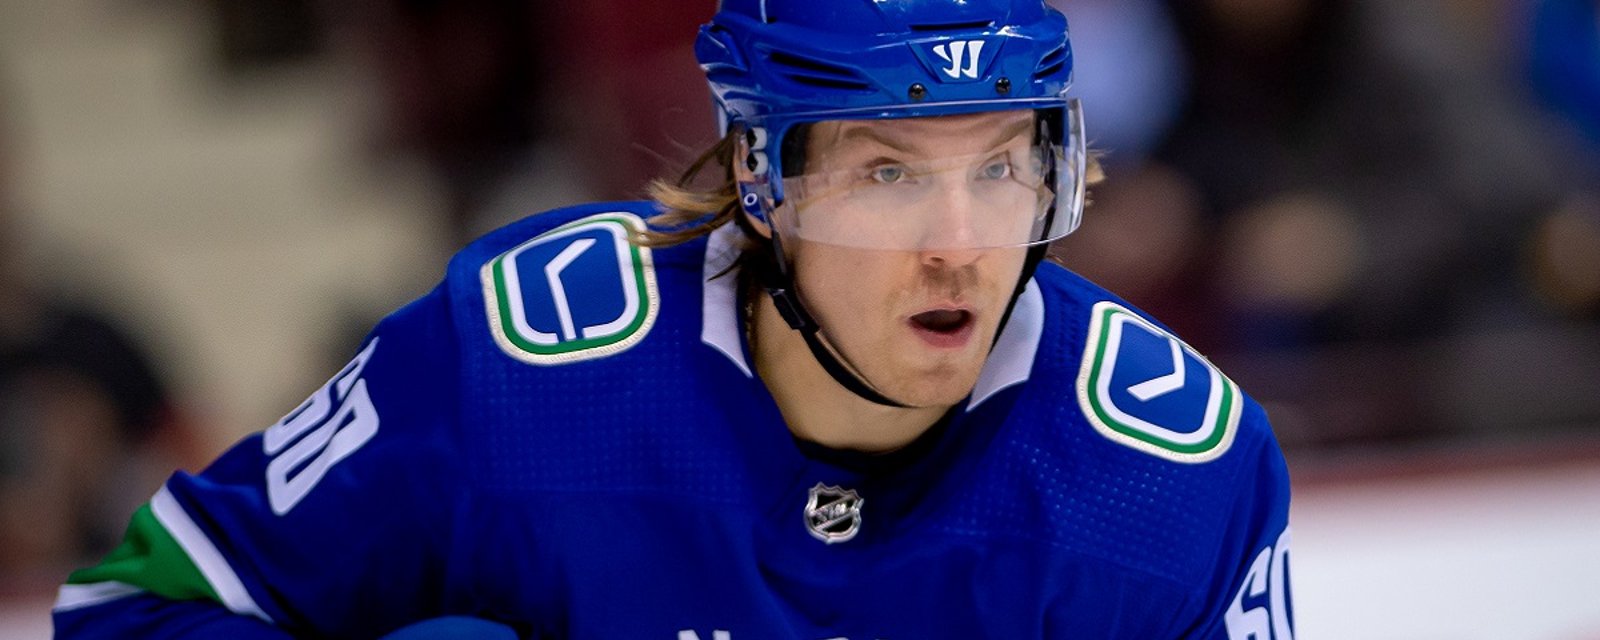 Markus Granlund is leaving the NHL.